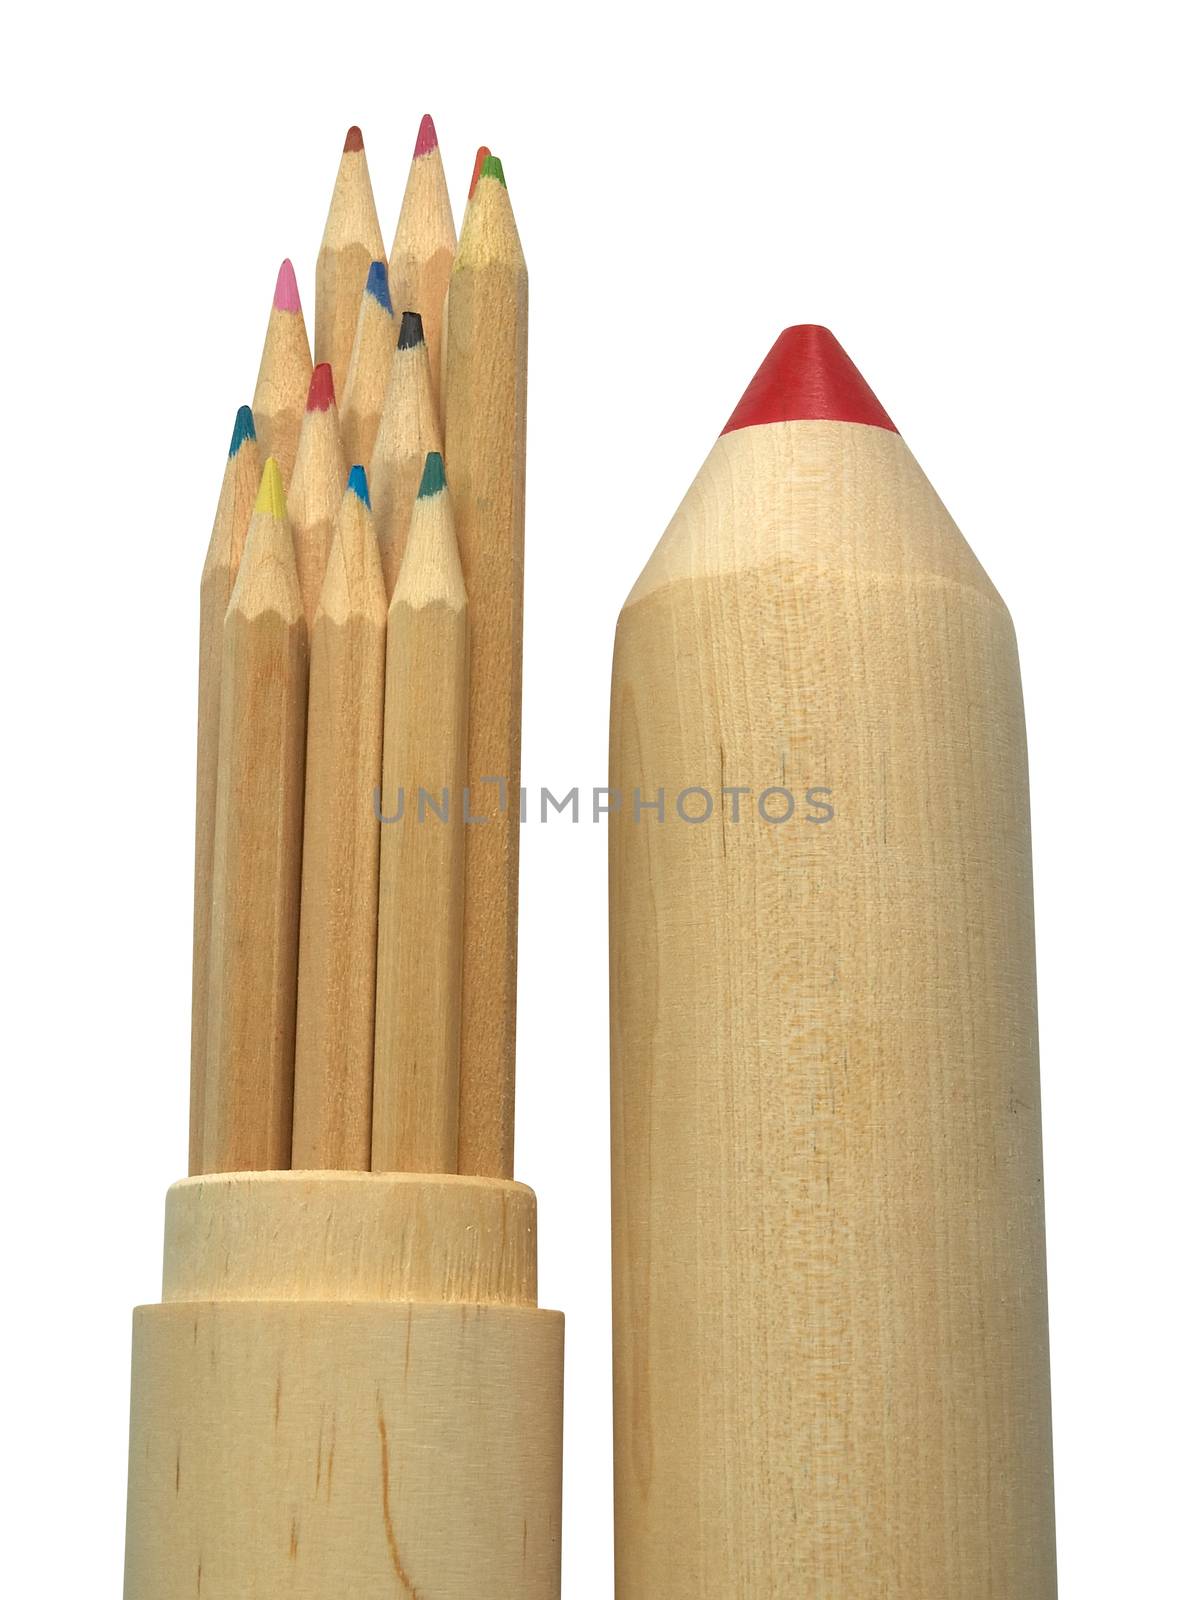 Big wooden pencil-case filled with colored pencils. Clipping path.